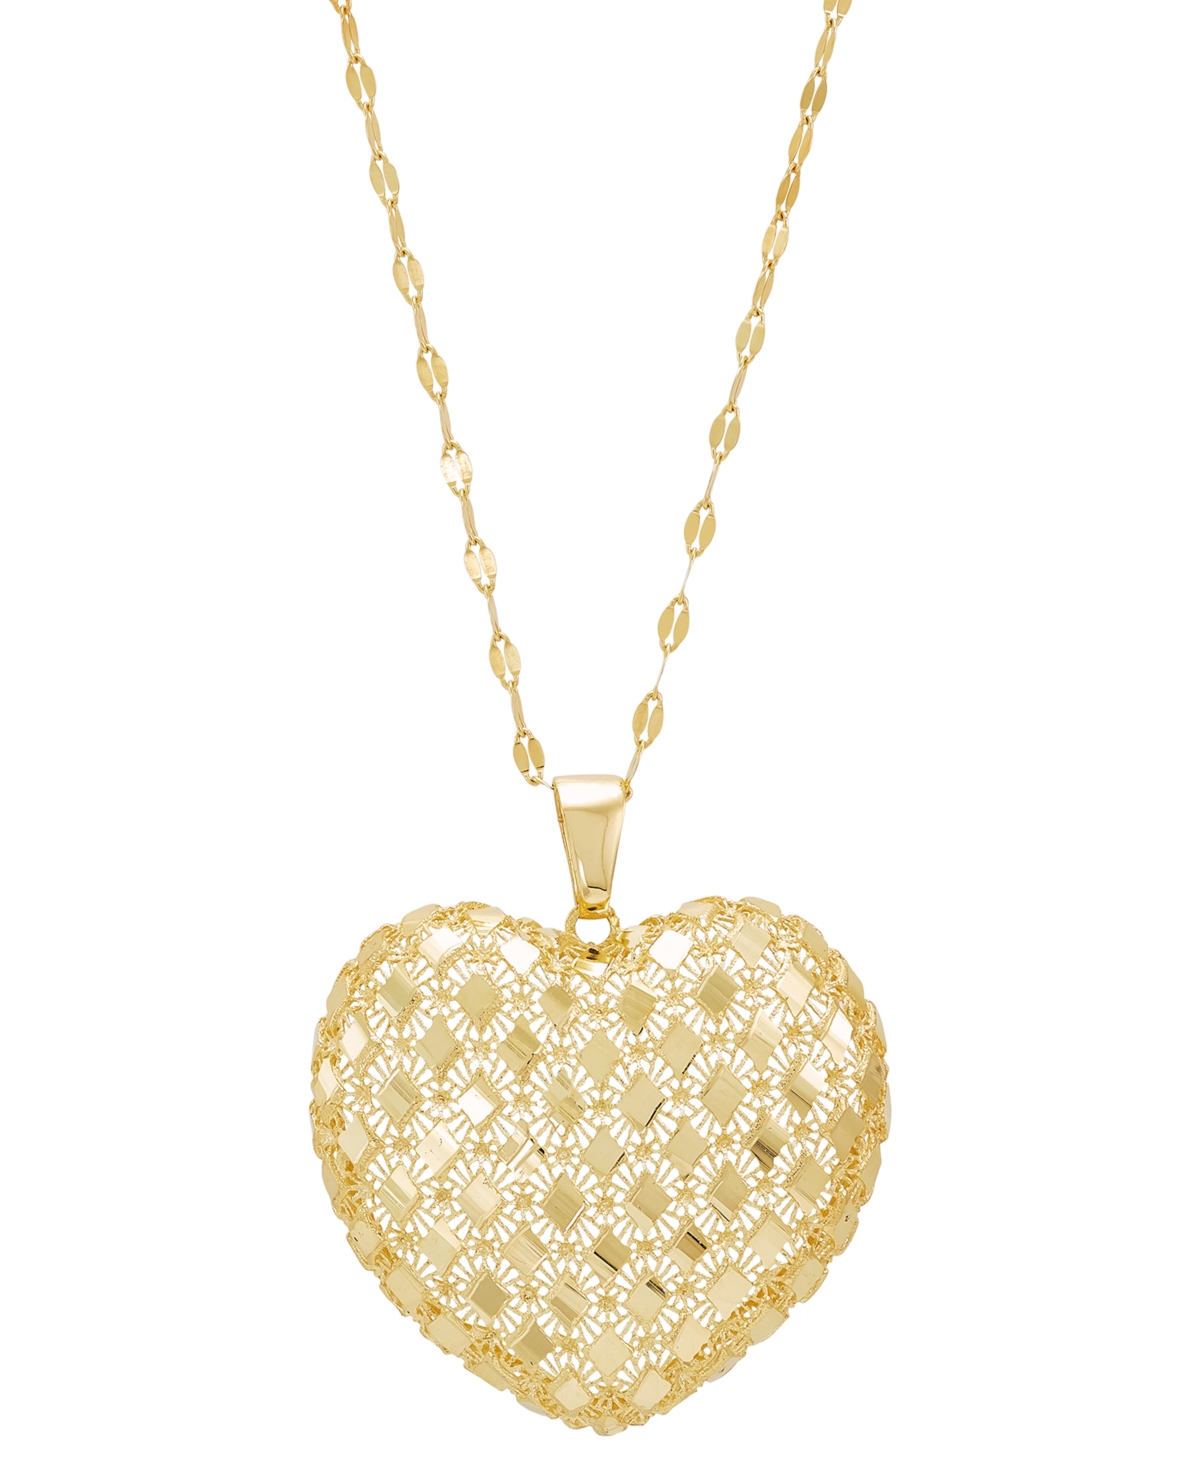 Openwork Heart 18" Pendant Necklace in 10k Gold - Gold